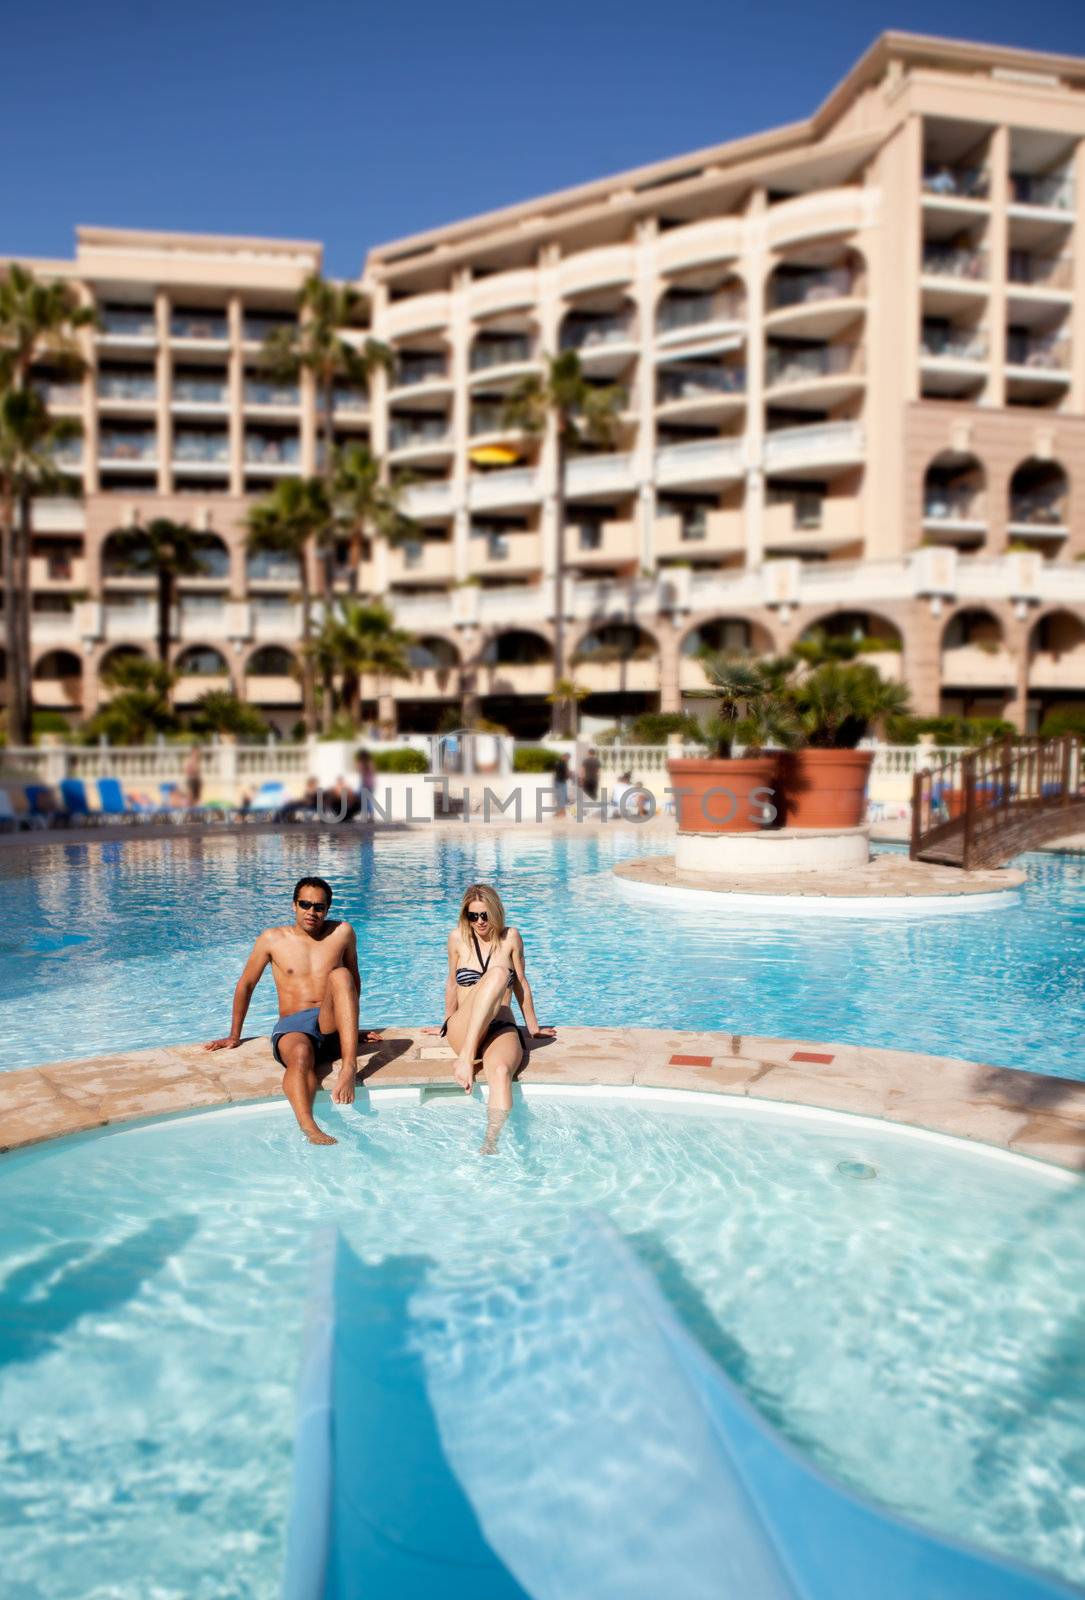 A man and woman enjoying a hotel pool with waterslide